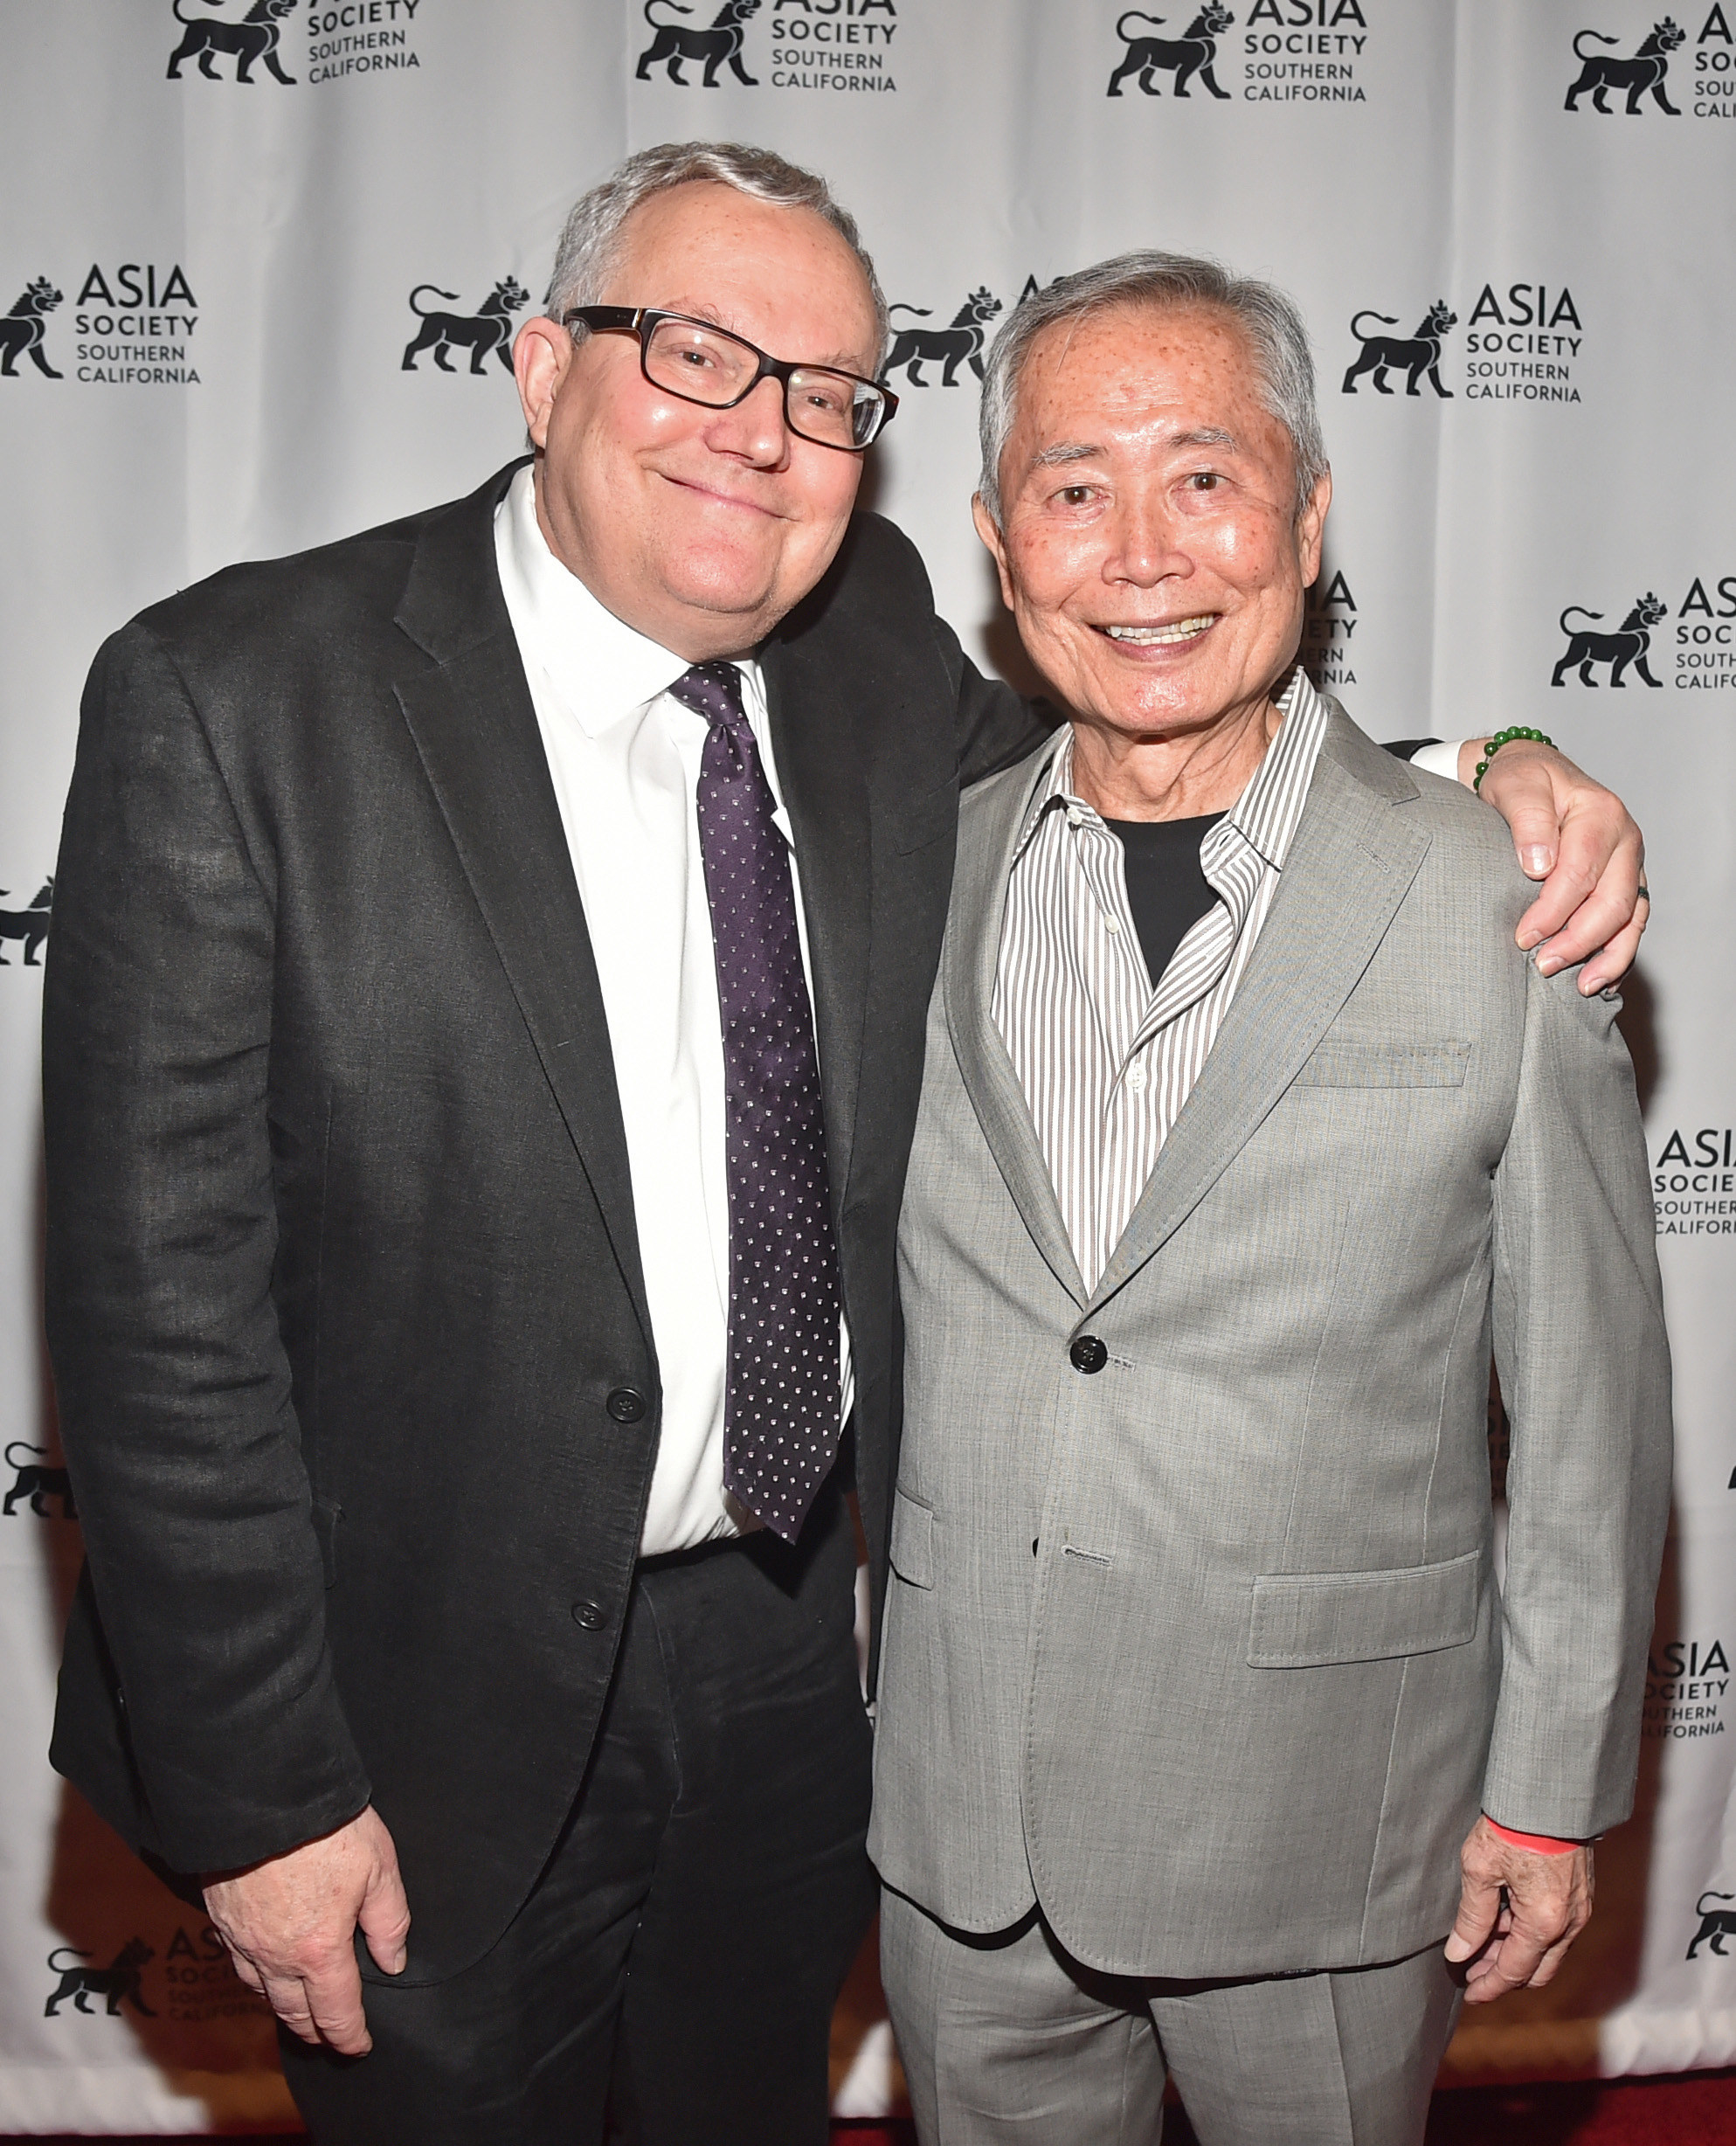 Brad and George Takei at an event